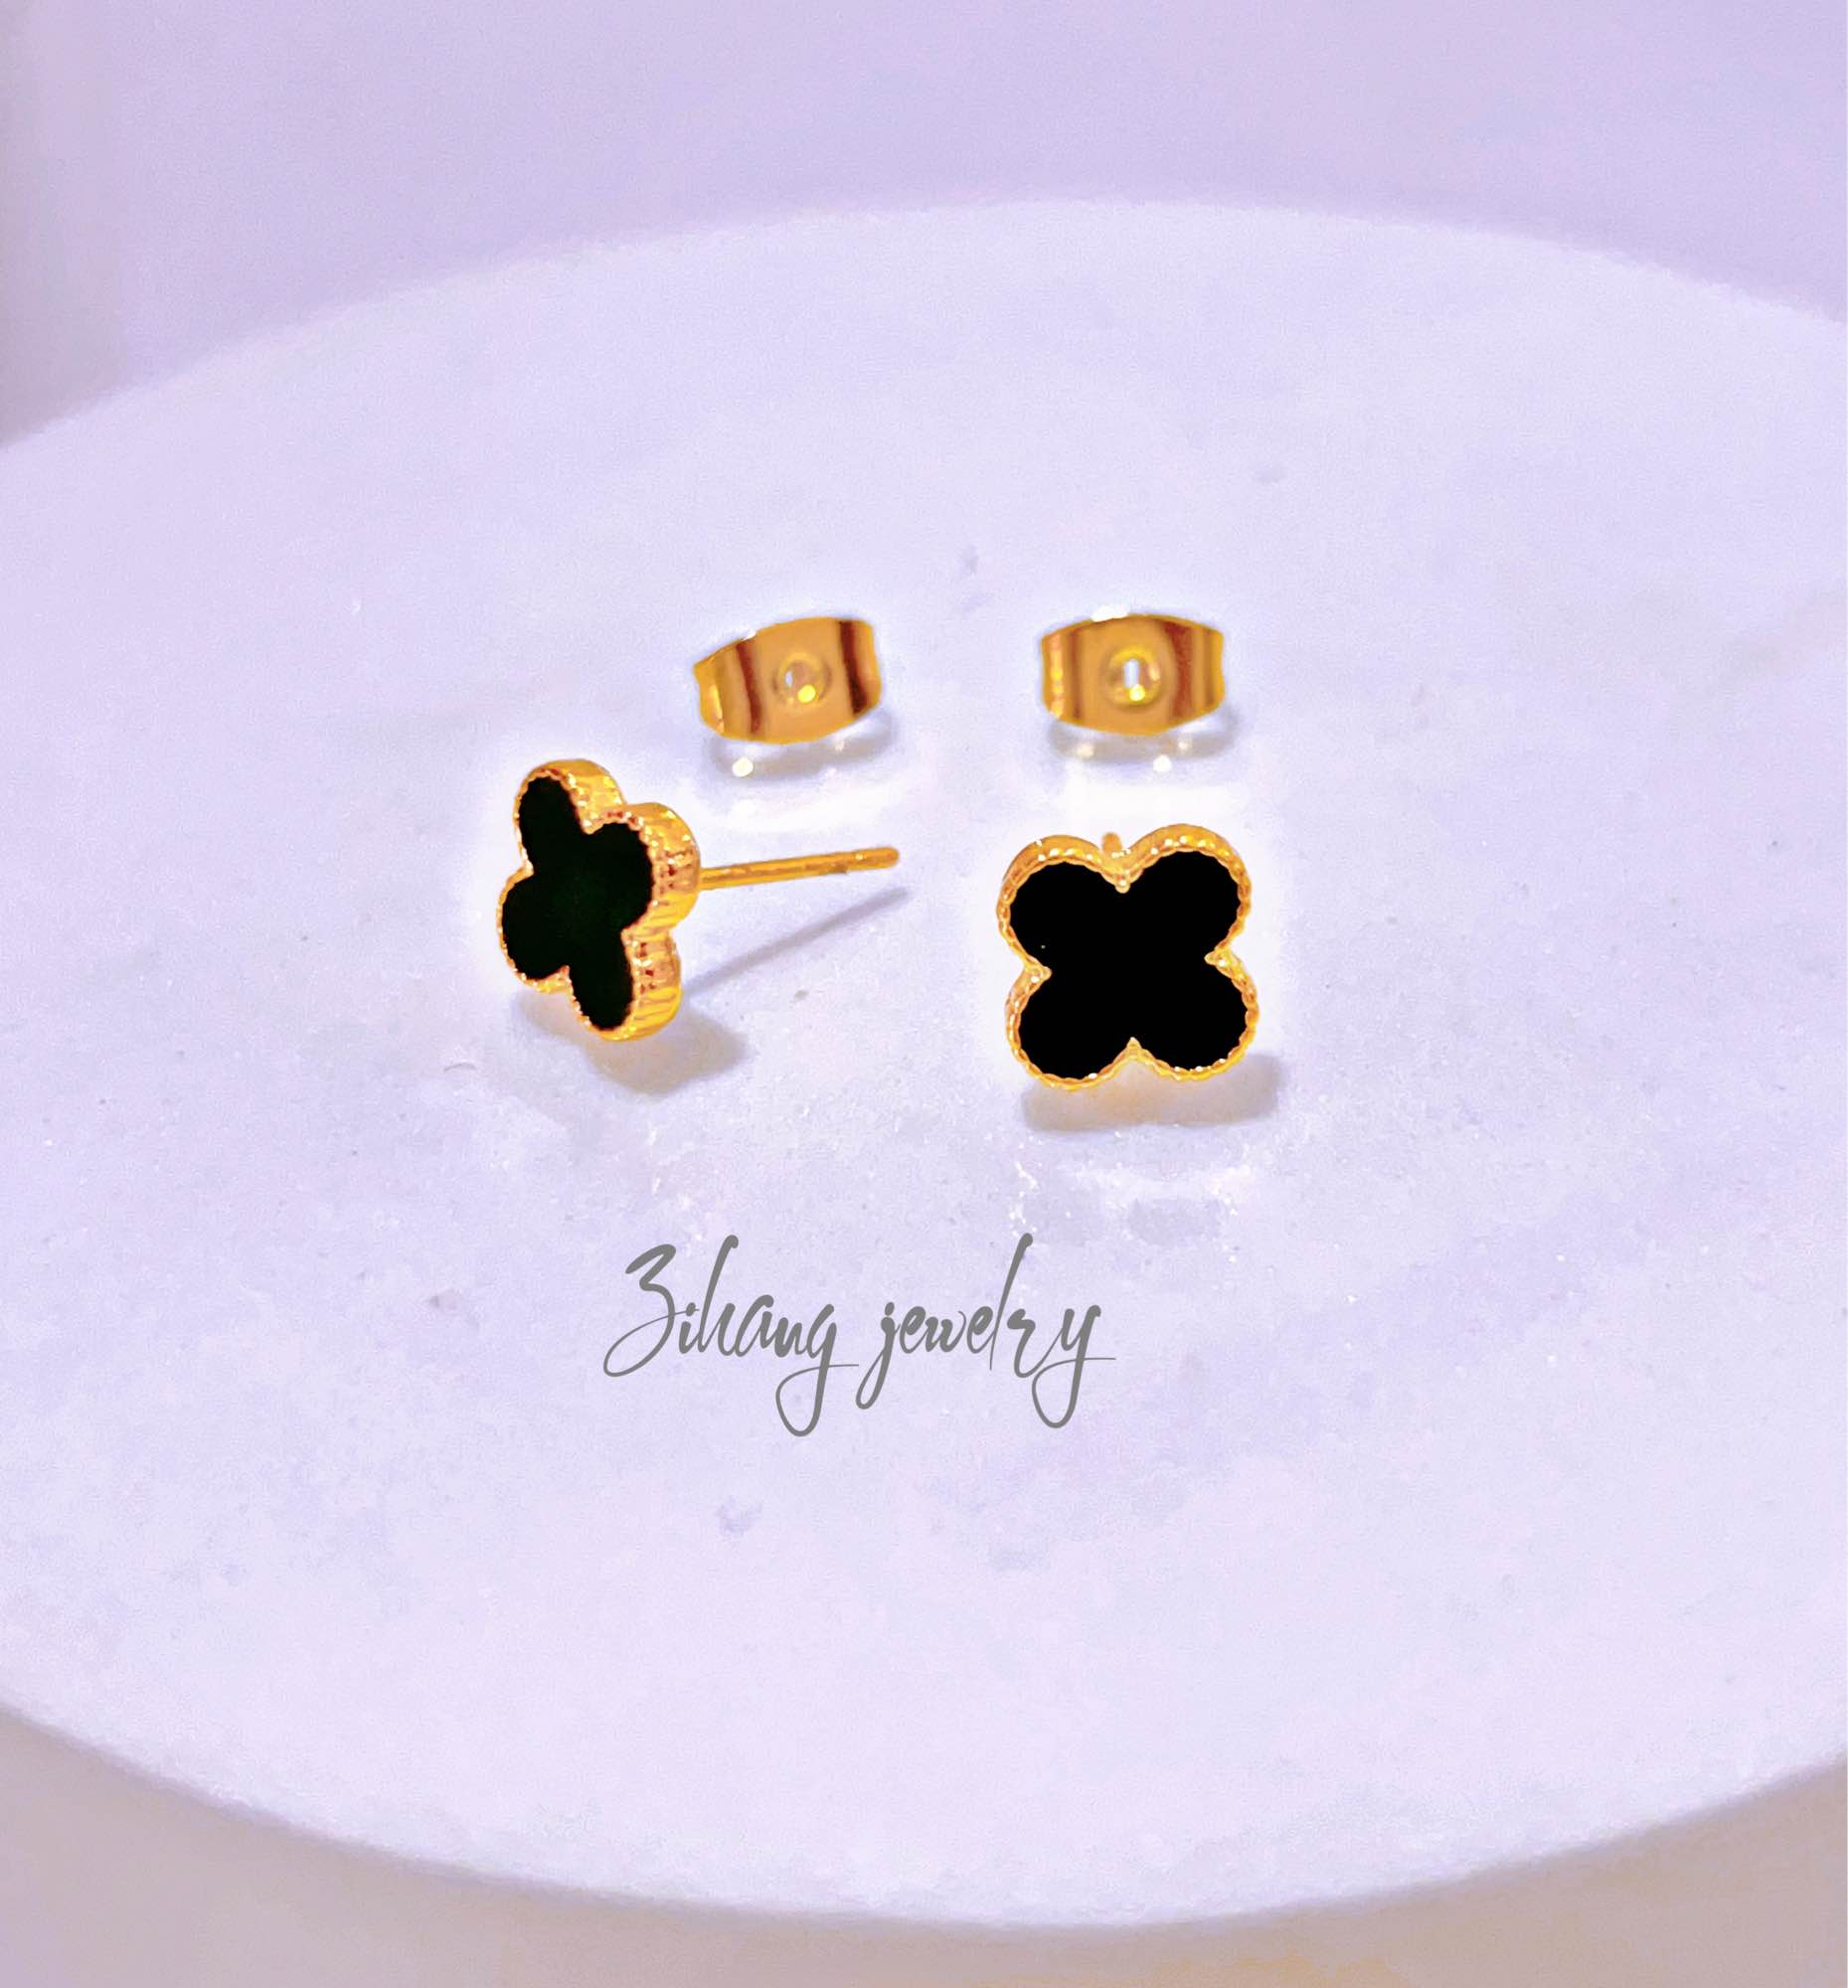 ZIHANG JEWELRY Gold Plated Stoned Studs Earrings for Women